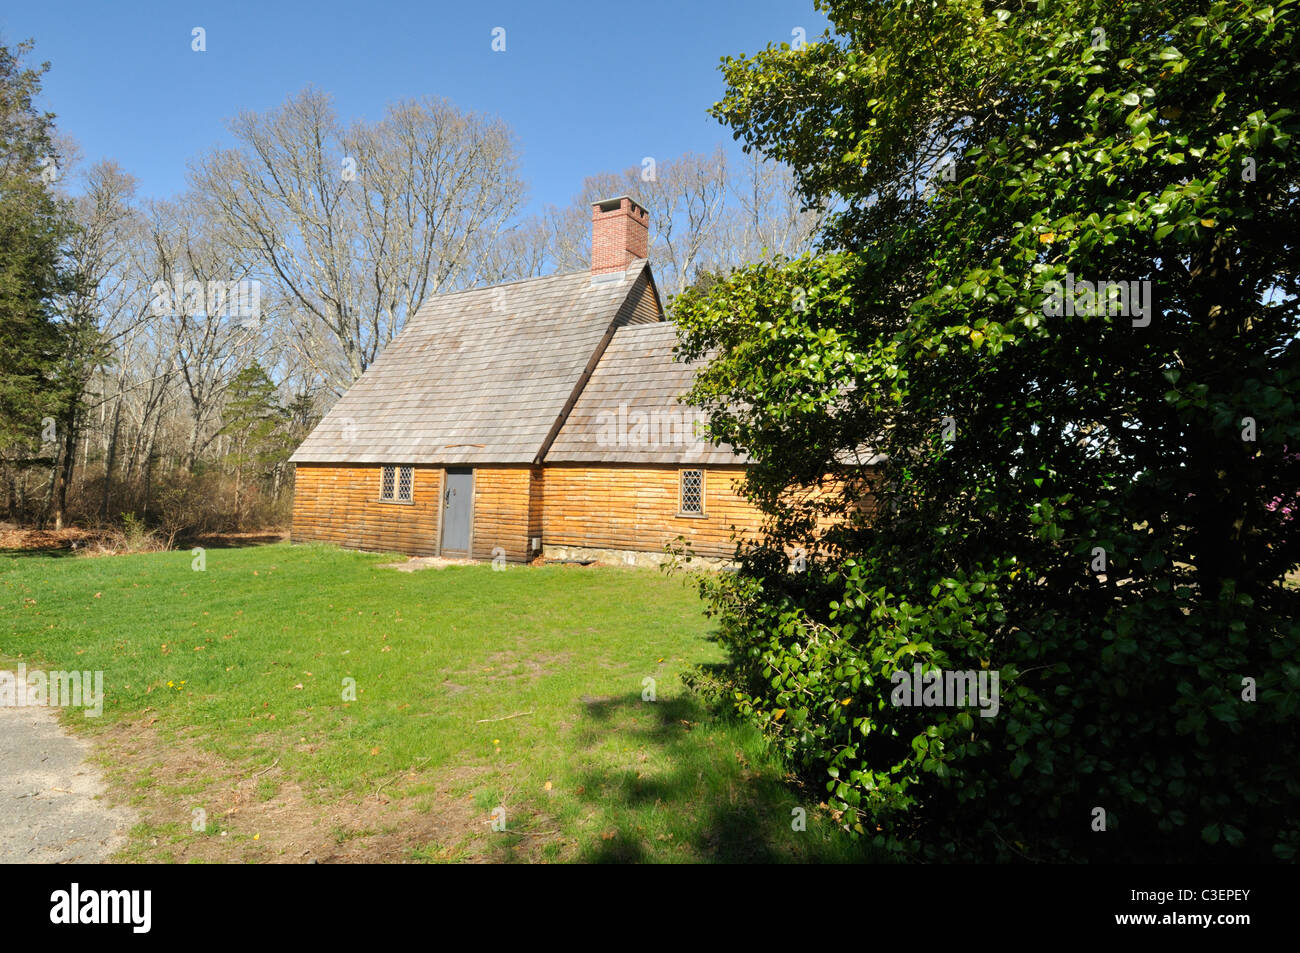 Historic Aptucxet trading post built by the Pilgrims for trading with the Wampanoag indians and the Dutch. Bourne, Cape Cod USA Stock Photo